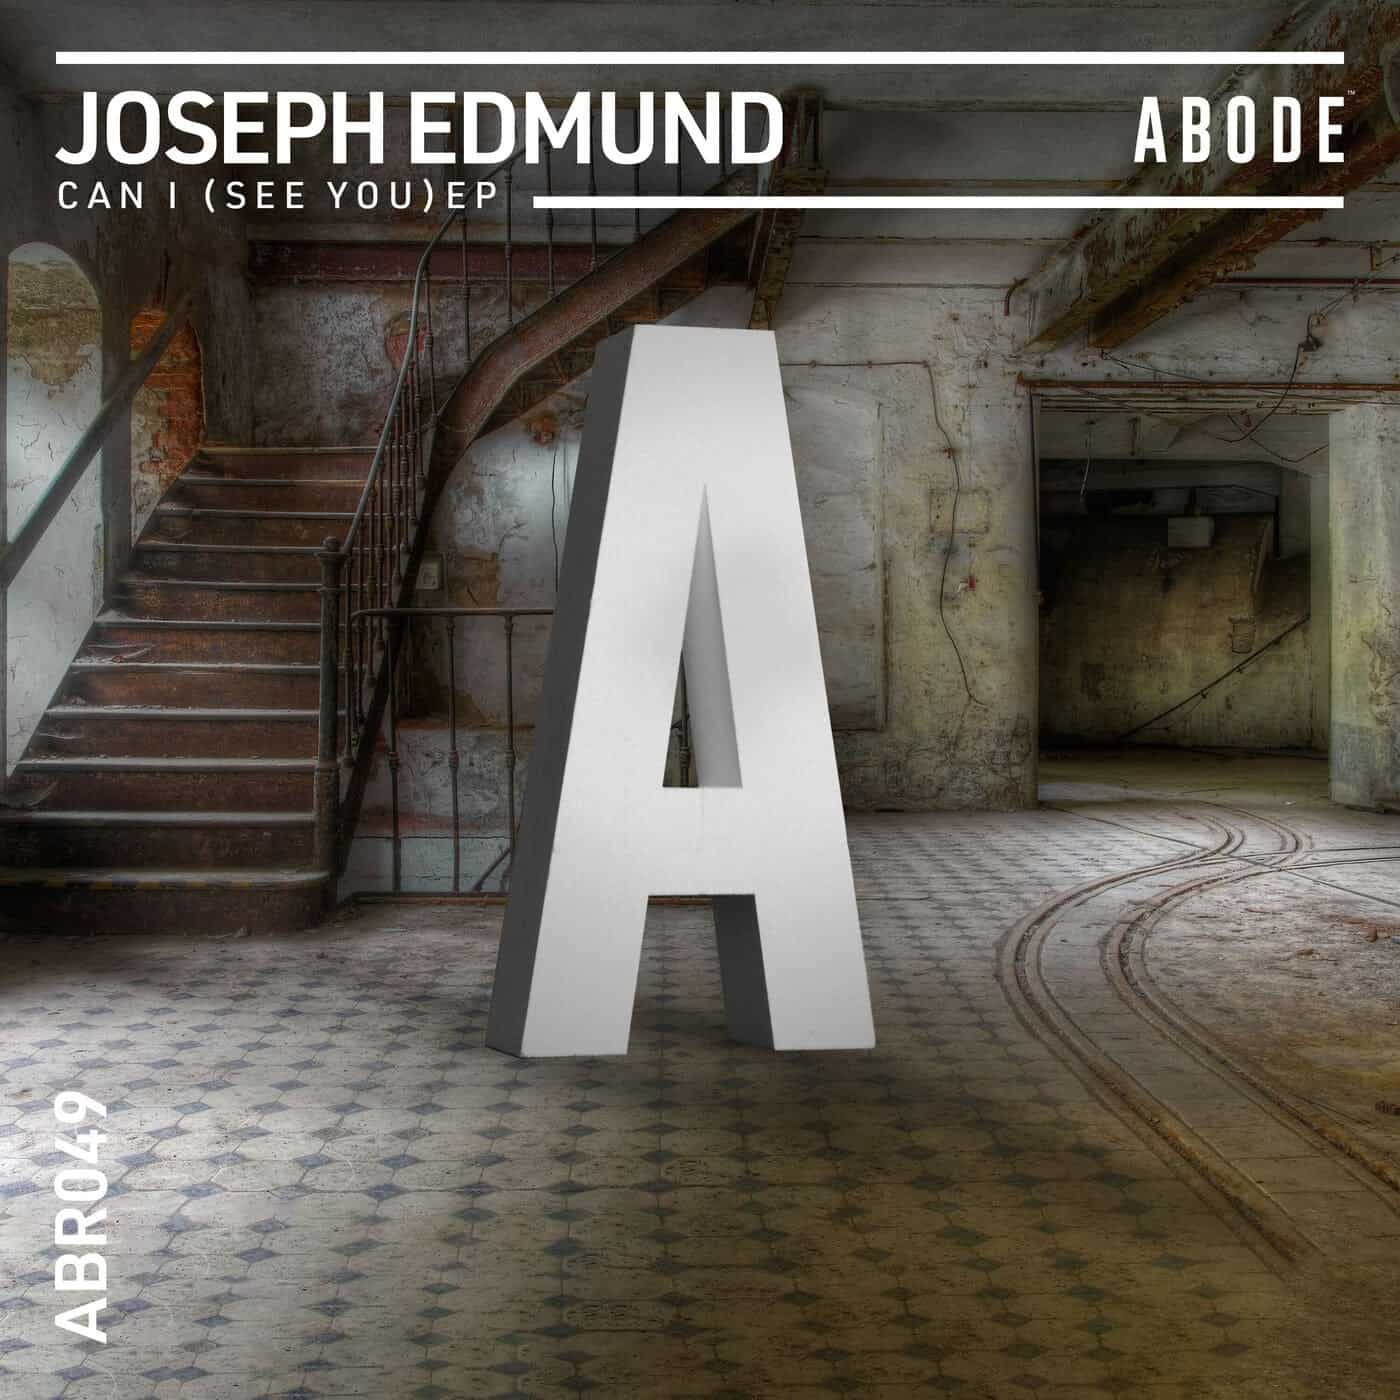 image cover: Can I (See You) EP by Joseph Edmund on ABODE Records